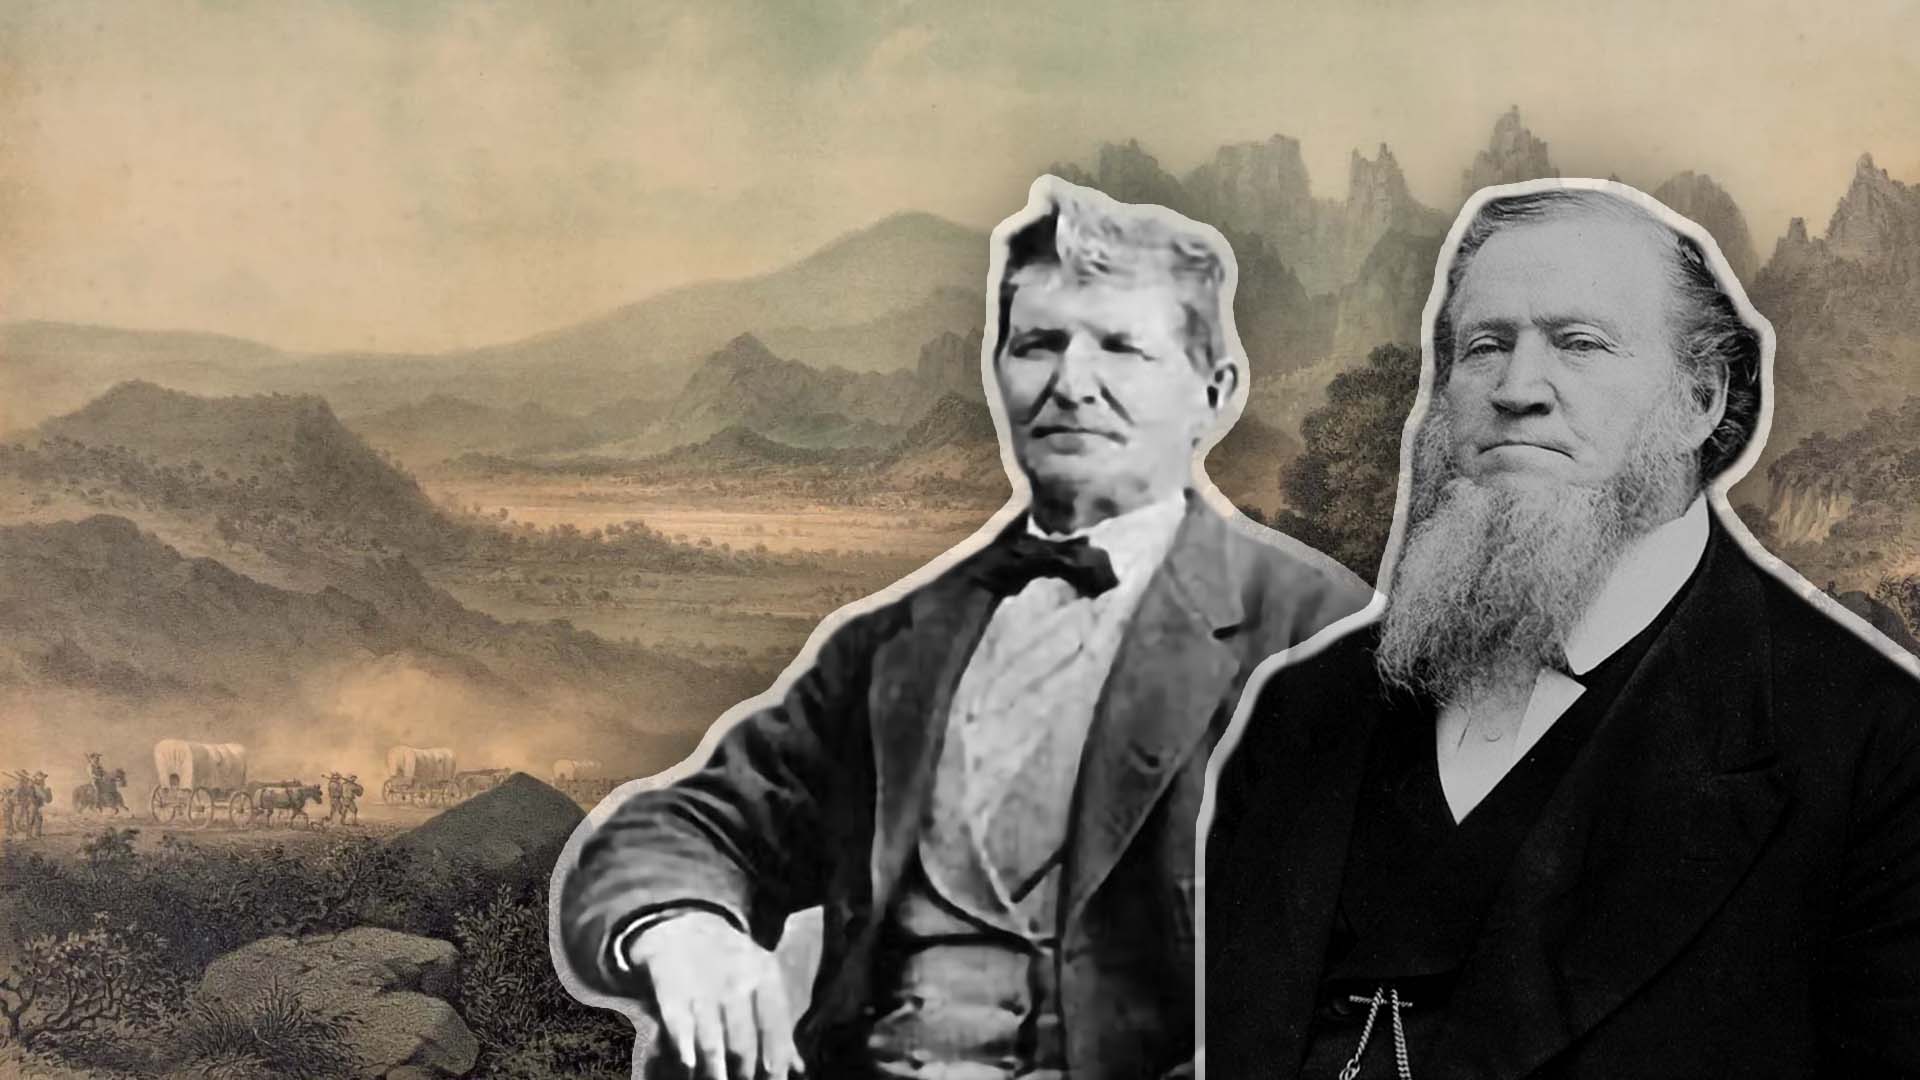 Covered wagons traveling in Utah shortly before the Mountain Meadows Massacre, September 1857. Portraits of John D. Lee (left) and Brigham Young (right).